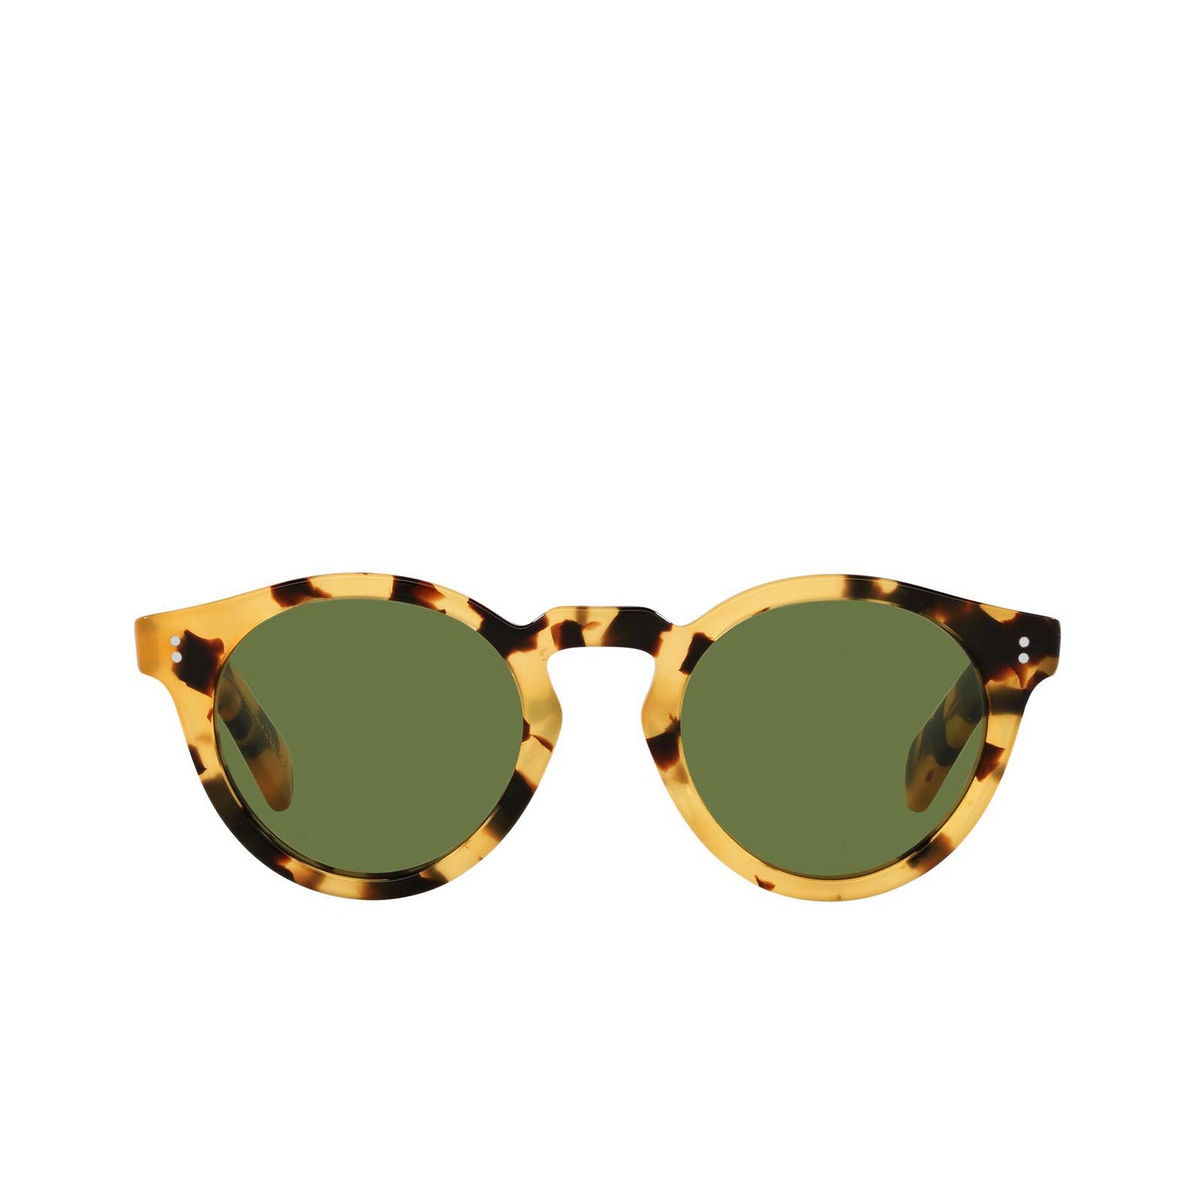 Oliver Peoples® Sunglasses: Martineaux OV5450SU color Ytb 170152 - front view.